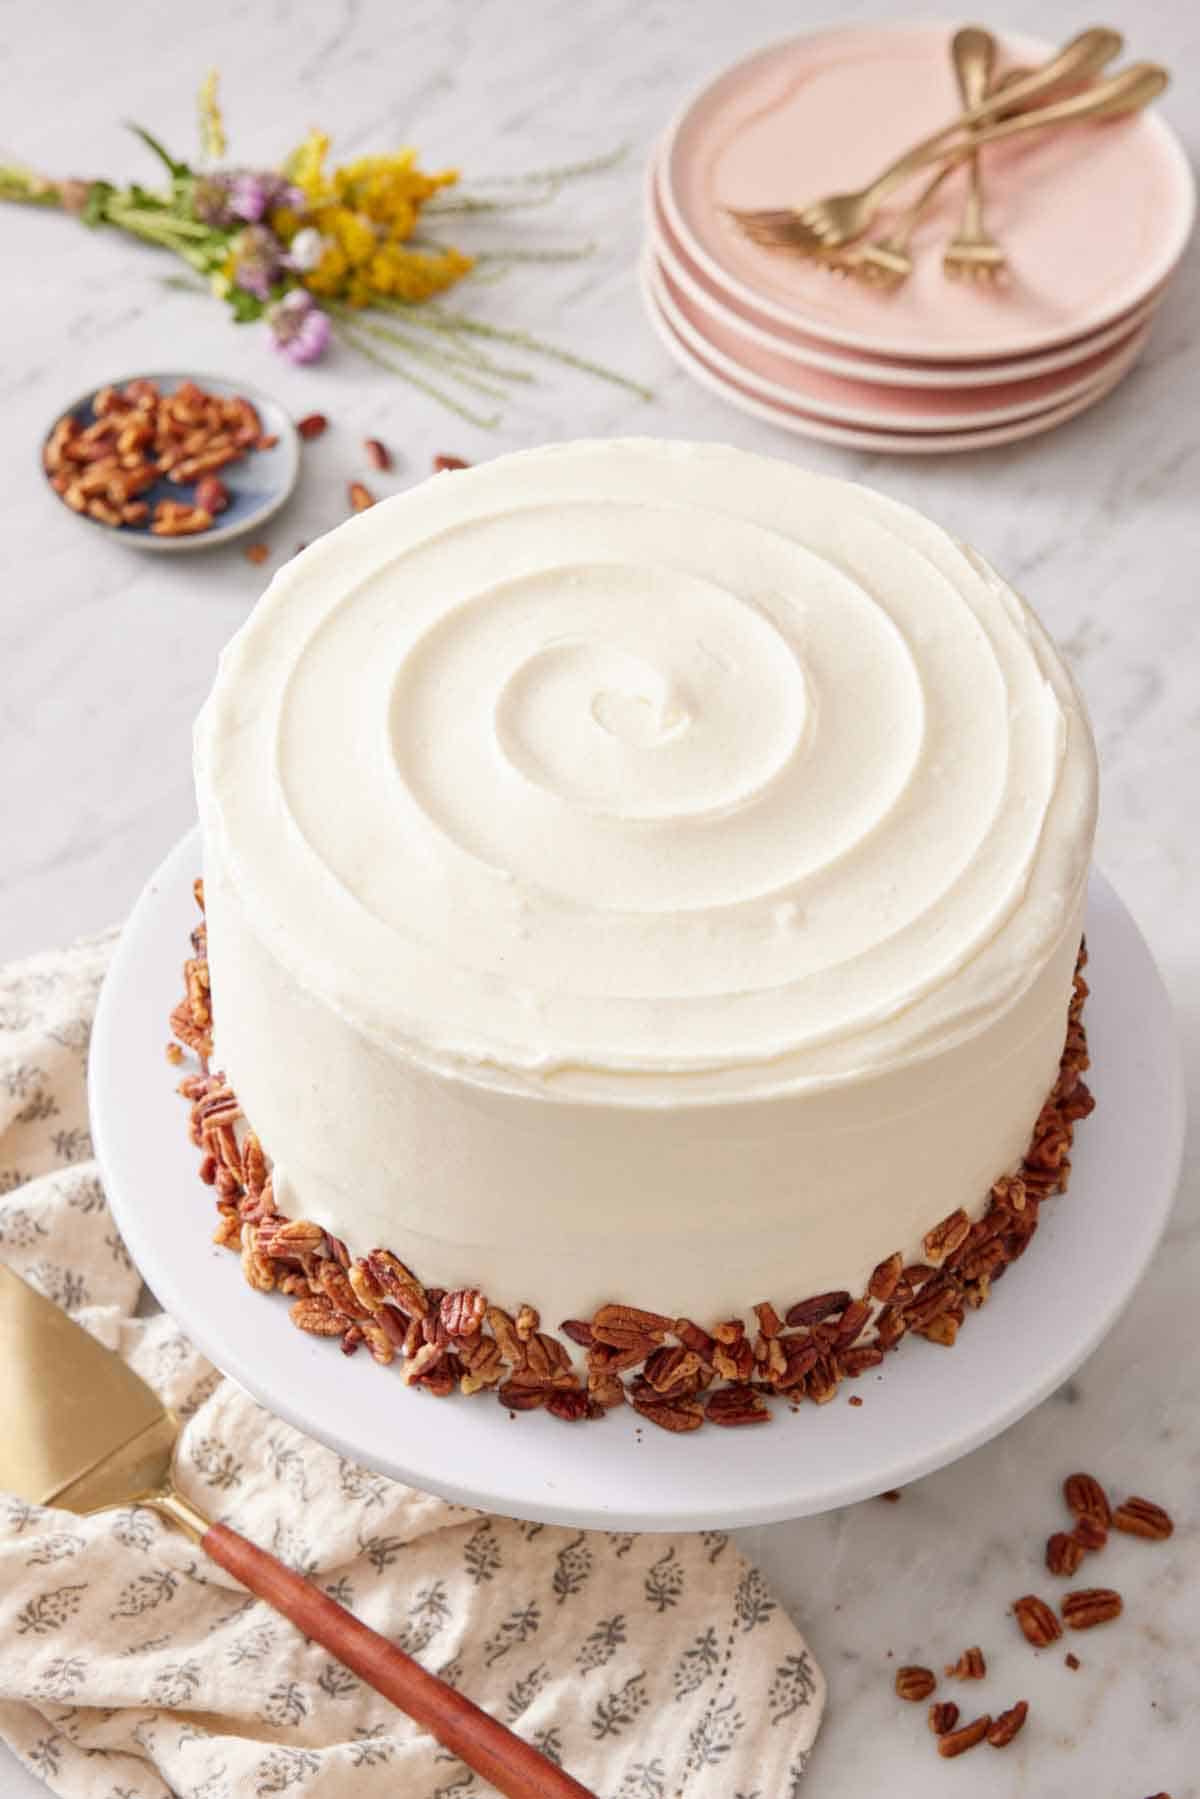 A butter pecan cake on a cake stand. A stack of plates and forks in the background with a bowl of pecans and some flowers.